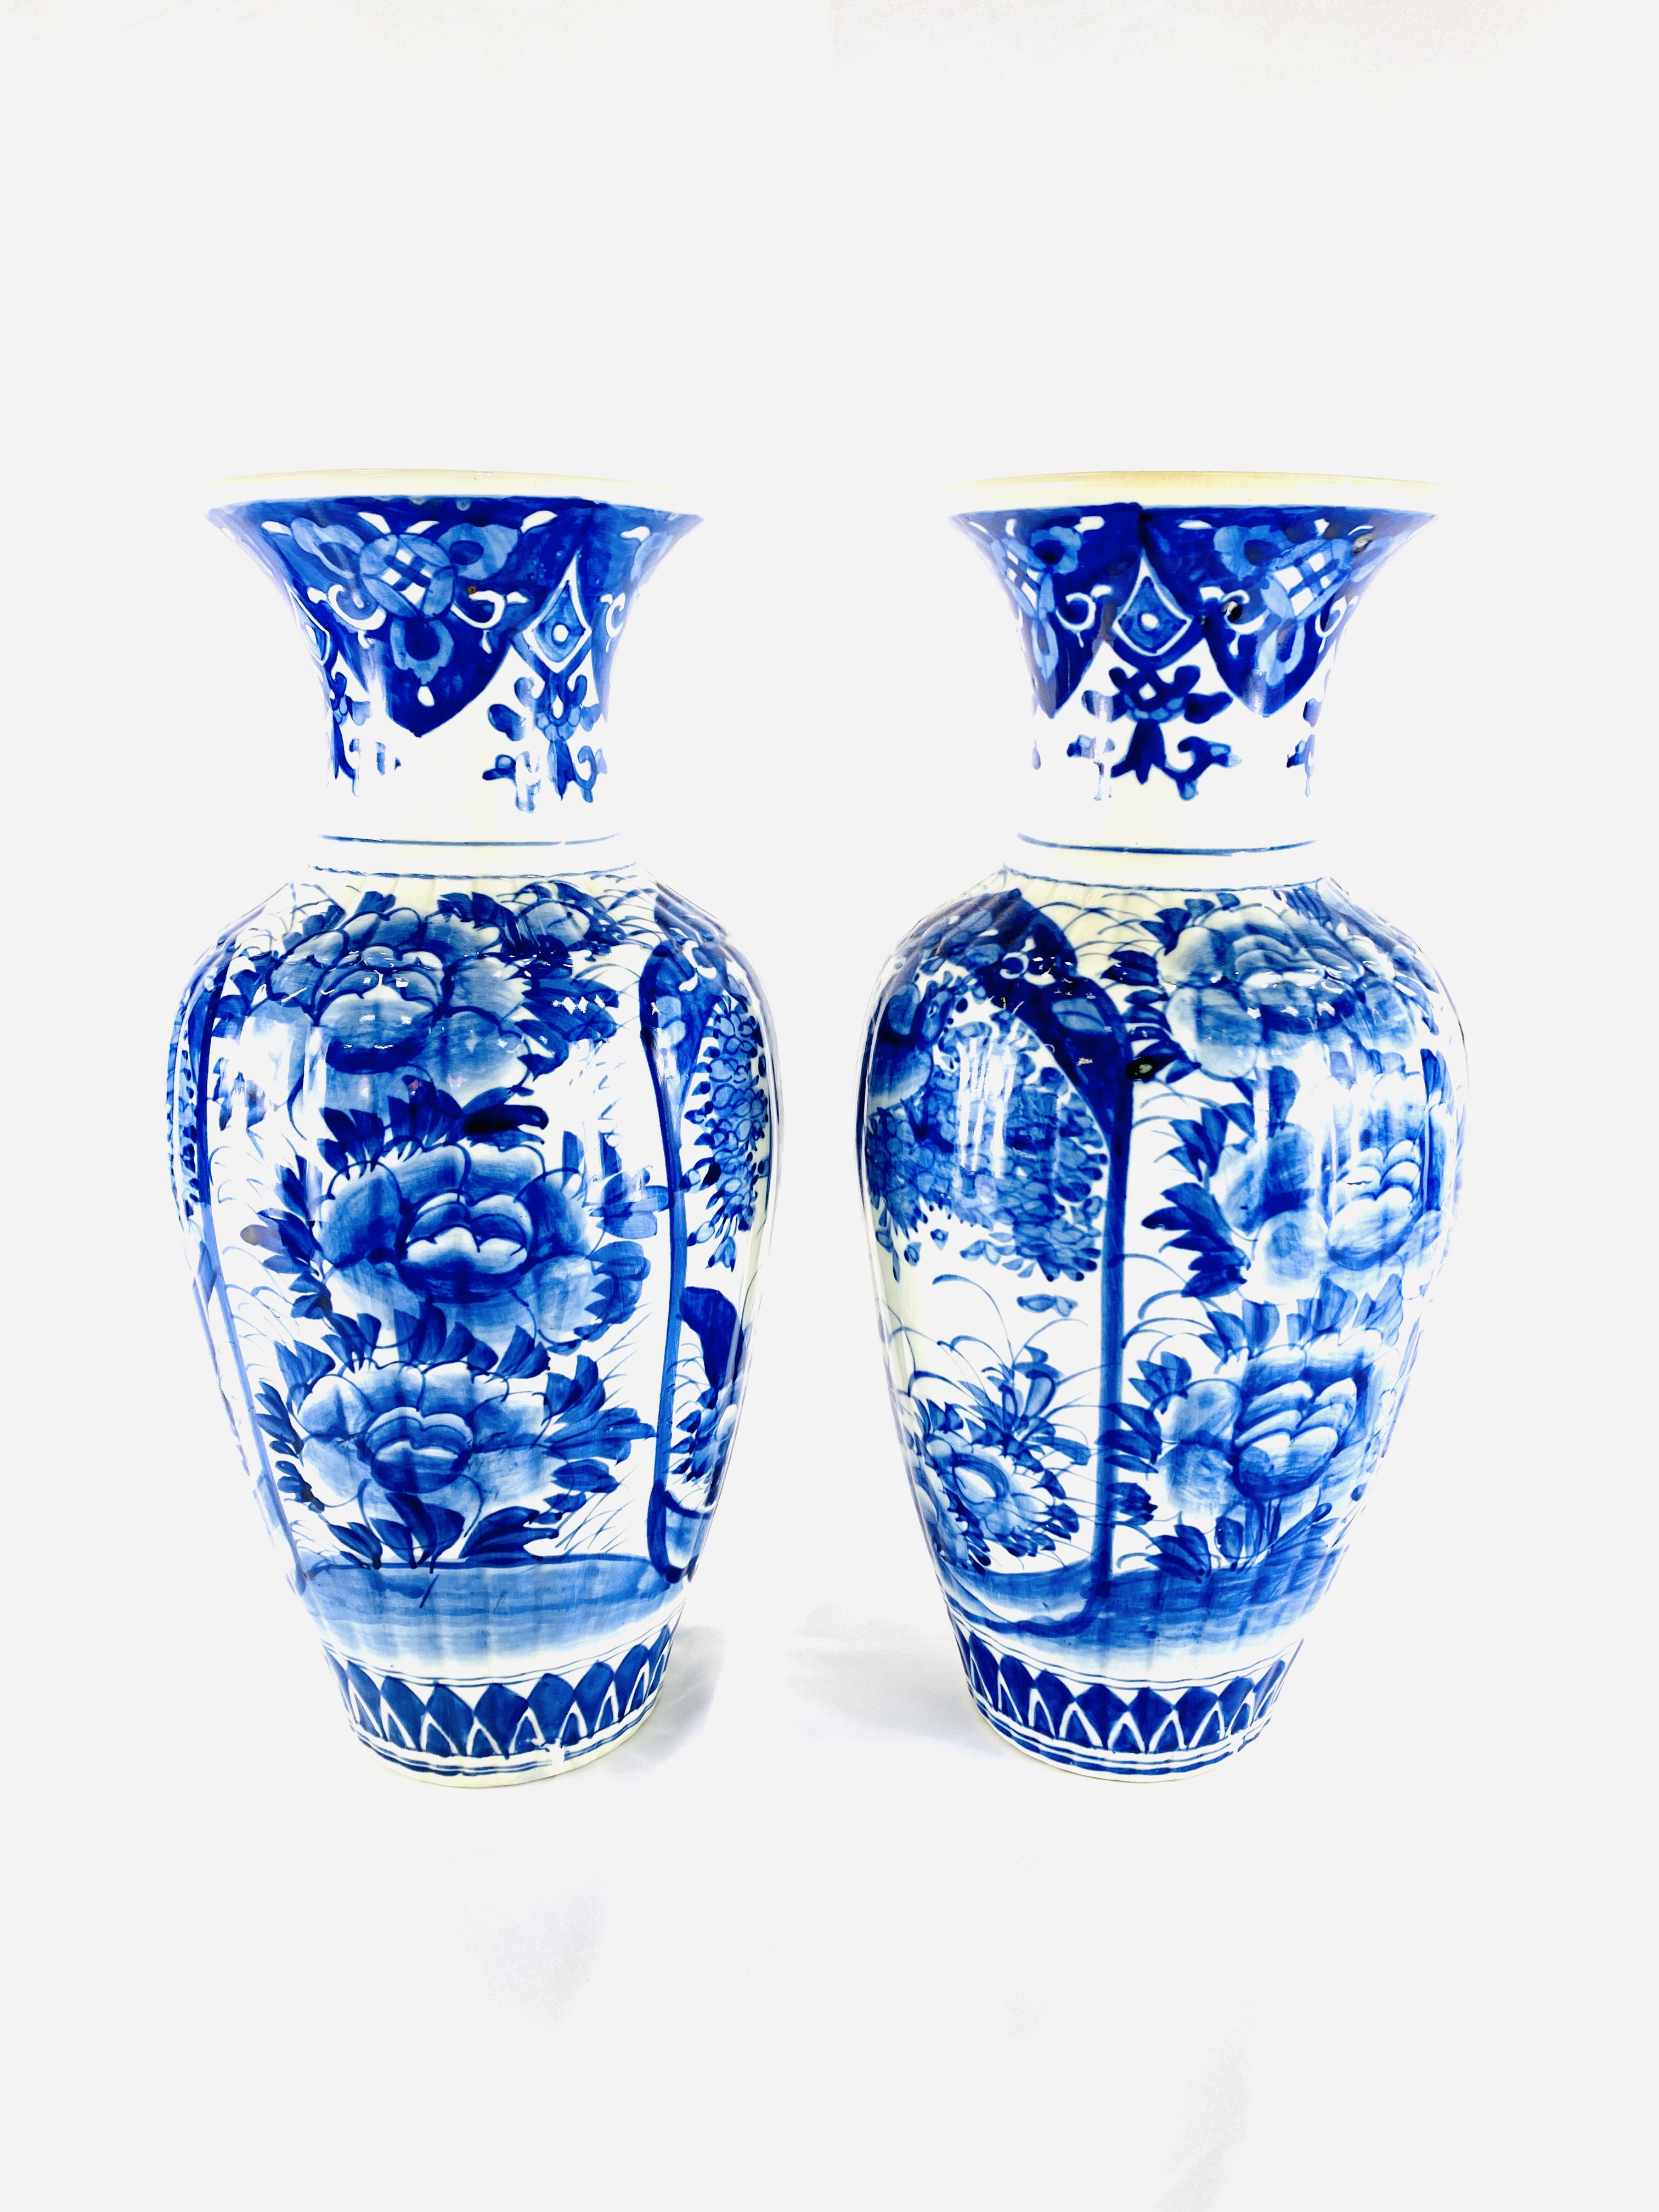 Pair of blue and white vases